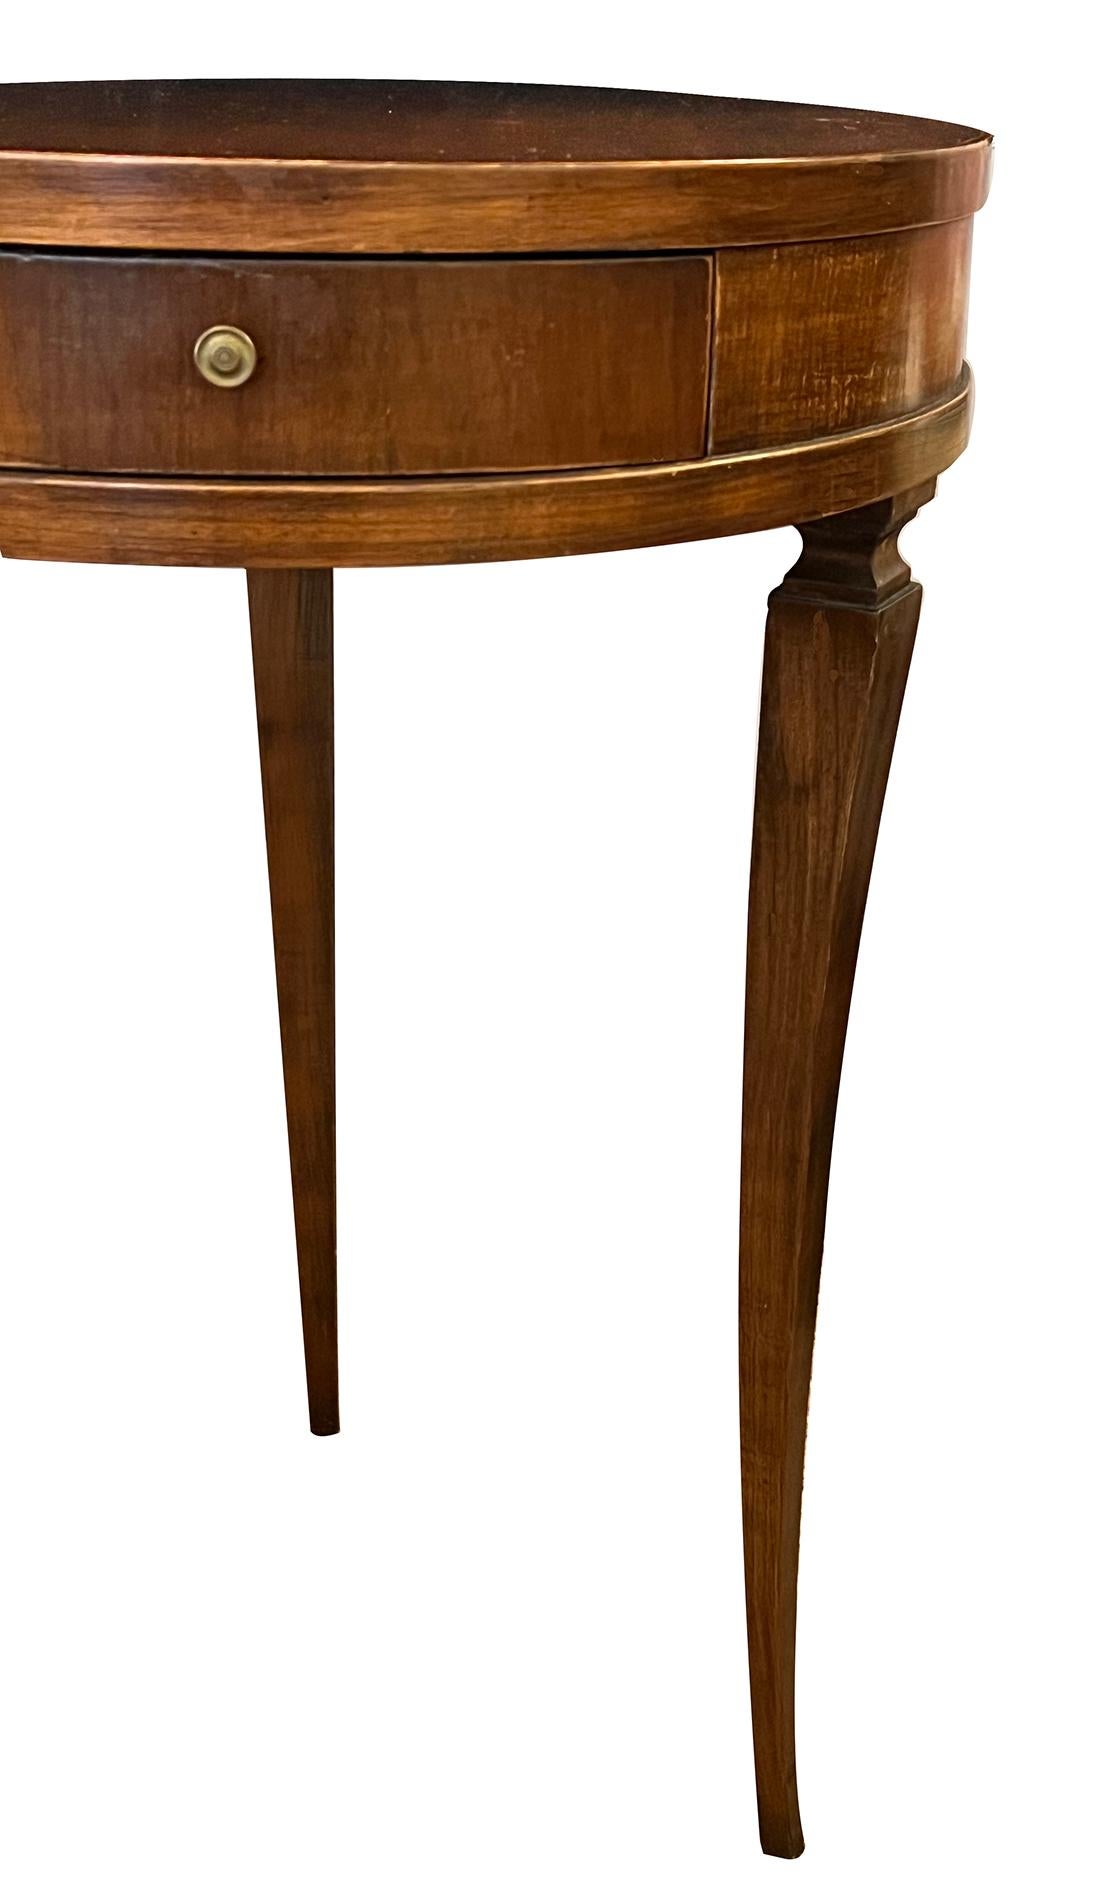 A Graceful Italian Neoclassical Style Beechwood Circular Single-drawer Side Tabl In Good Condition For Sale In San Francisco, CA